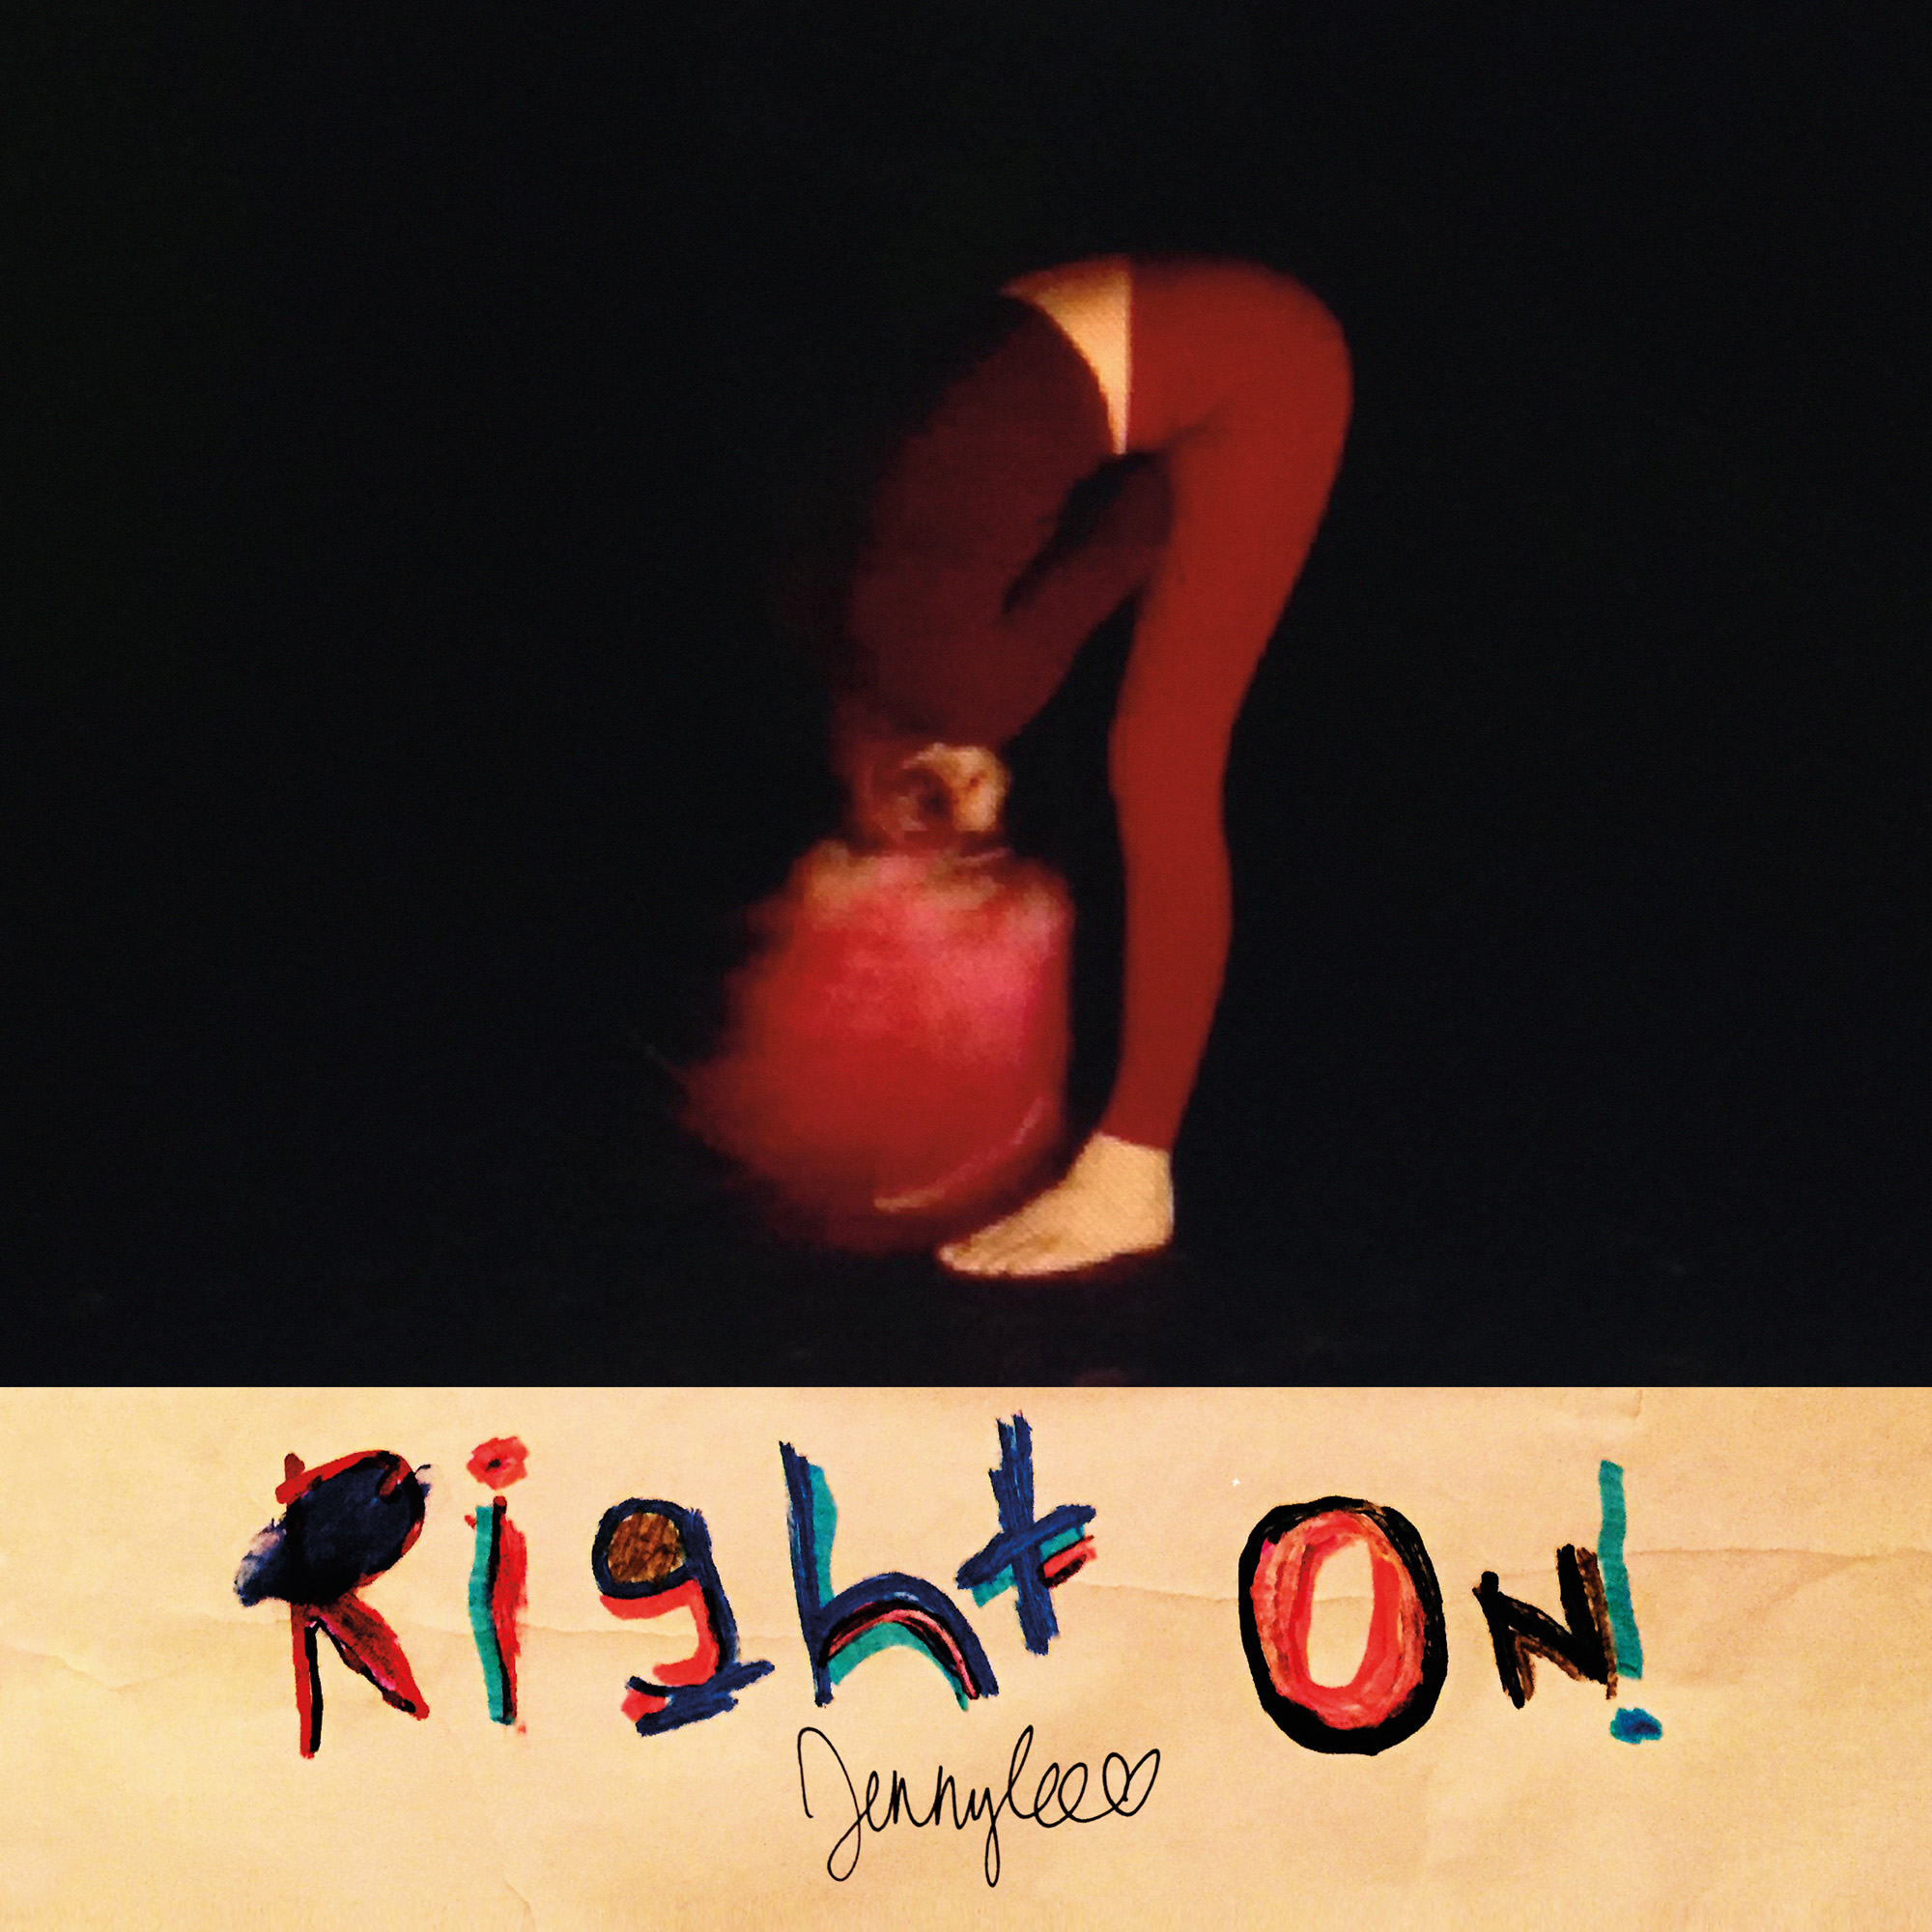 Review of 'Right On!' by Jennylee. The Warpaint member's debut solo album comes out on December 11th